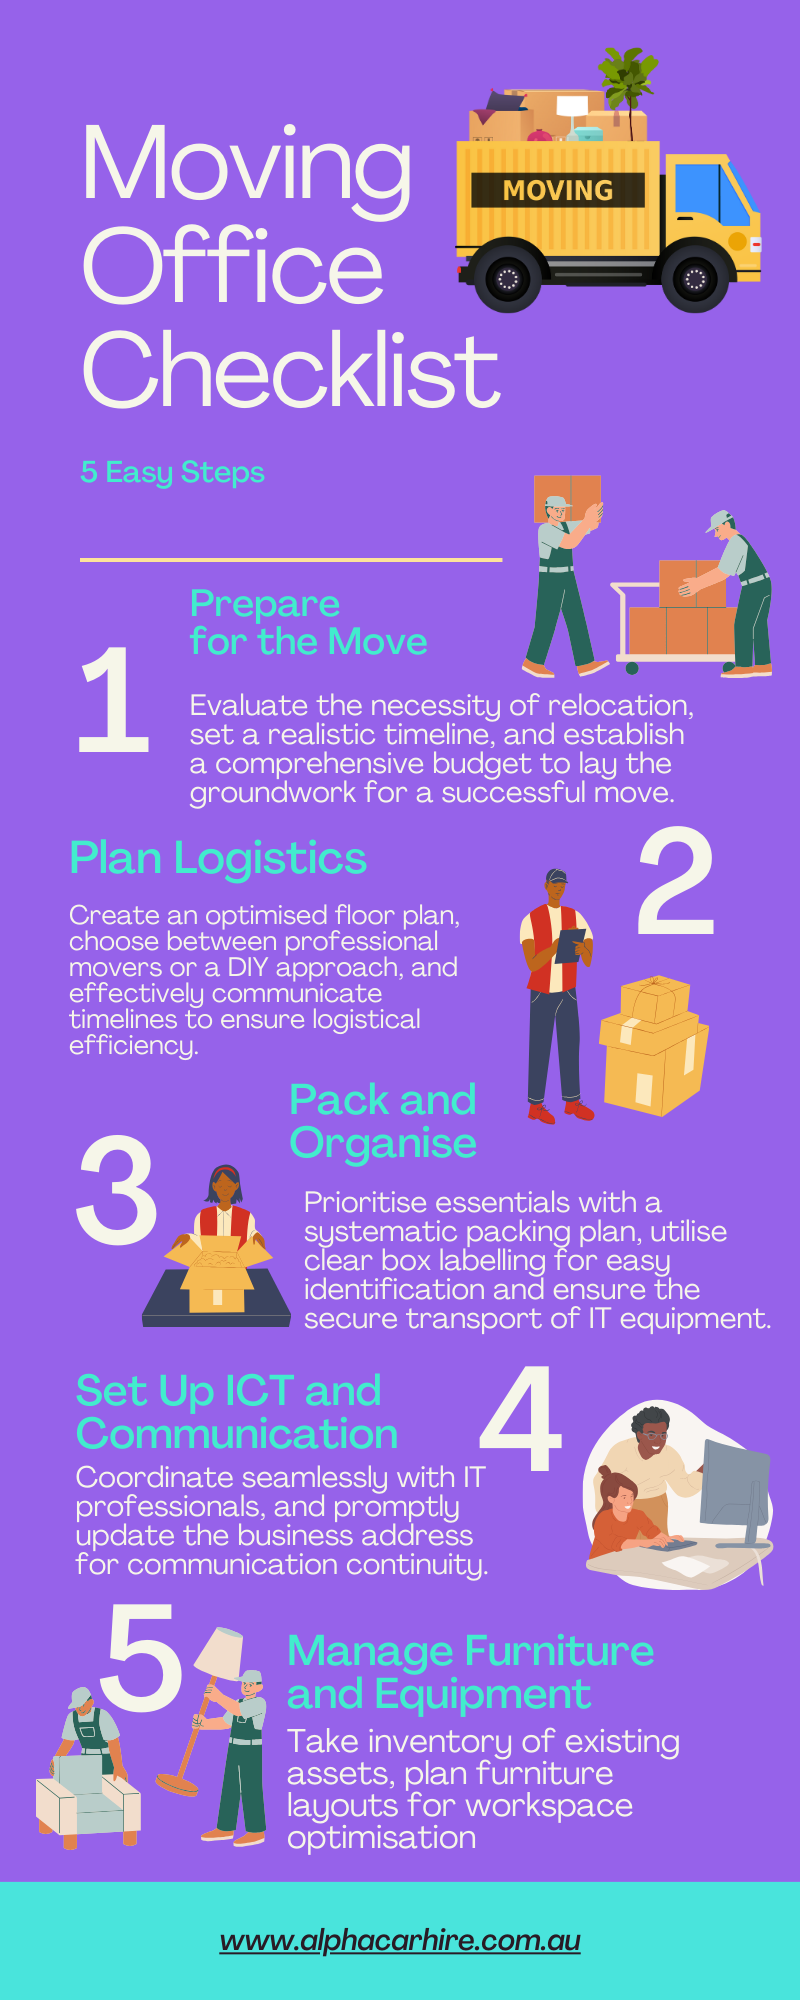 Moving Office Checklist - Infographic